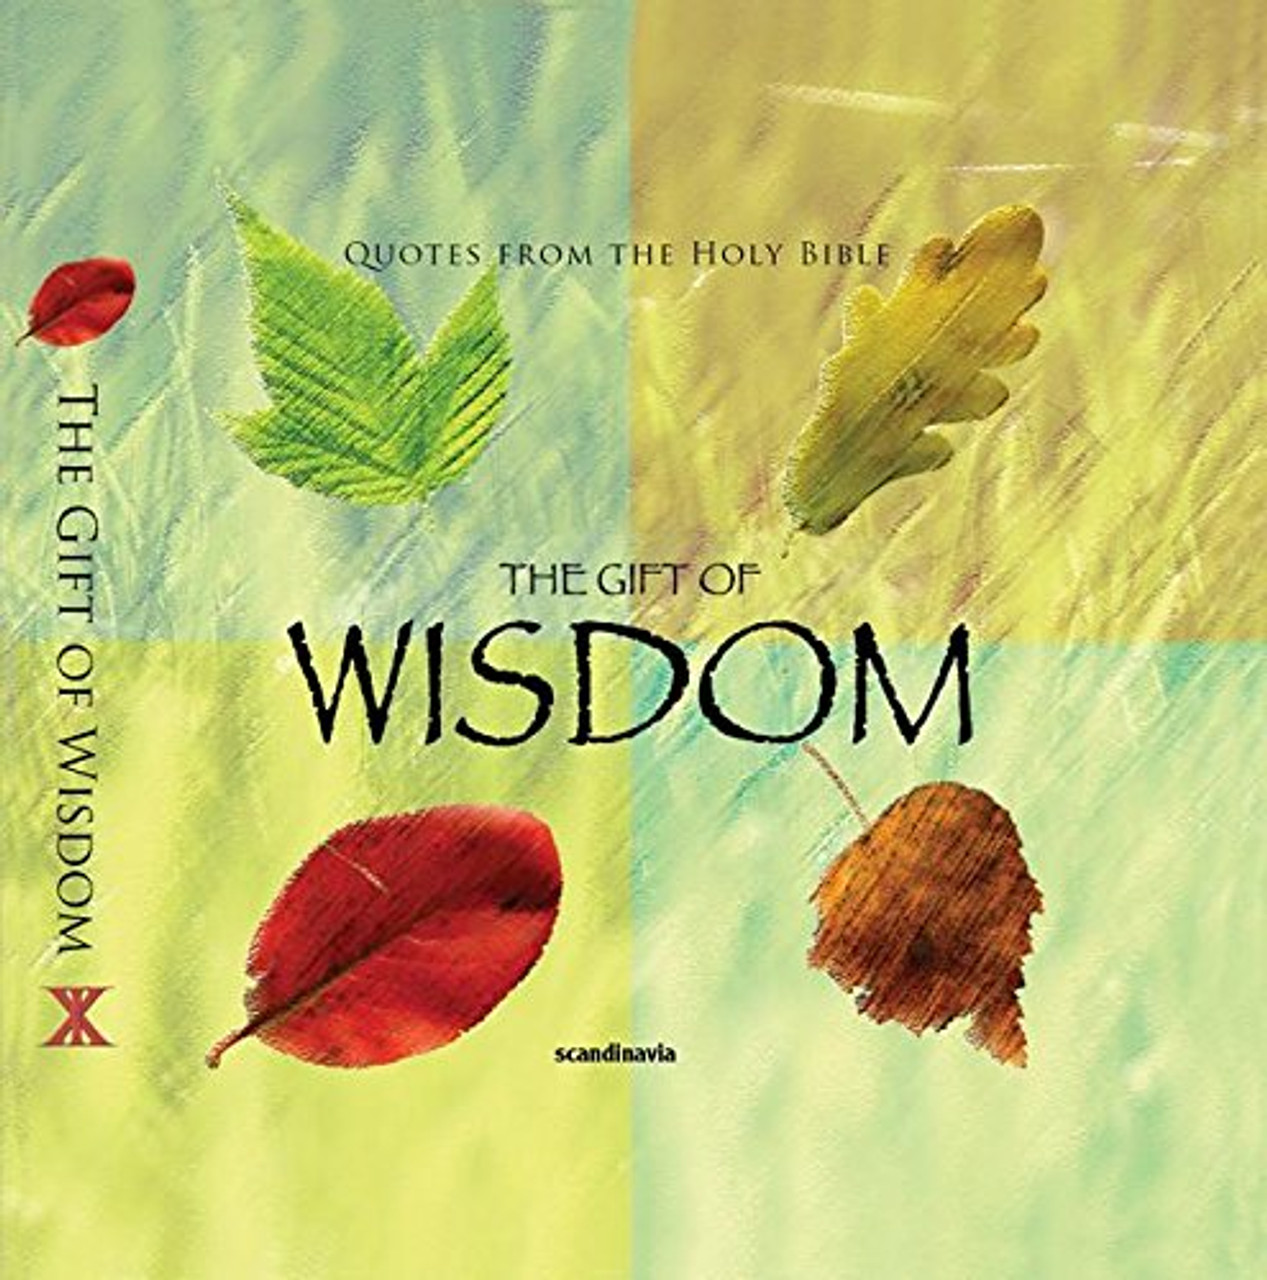 The Gift of Wisdom (Quotes) (Gift Book)